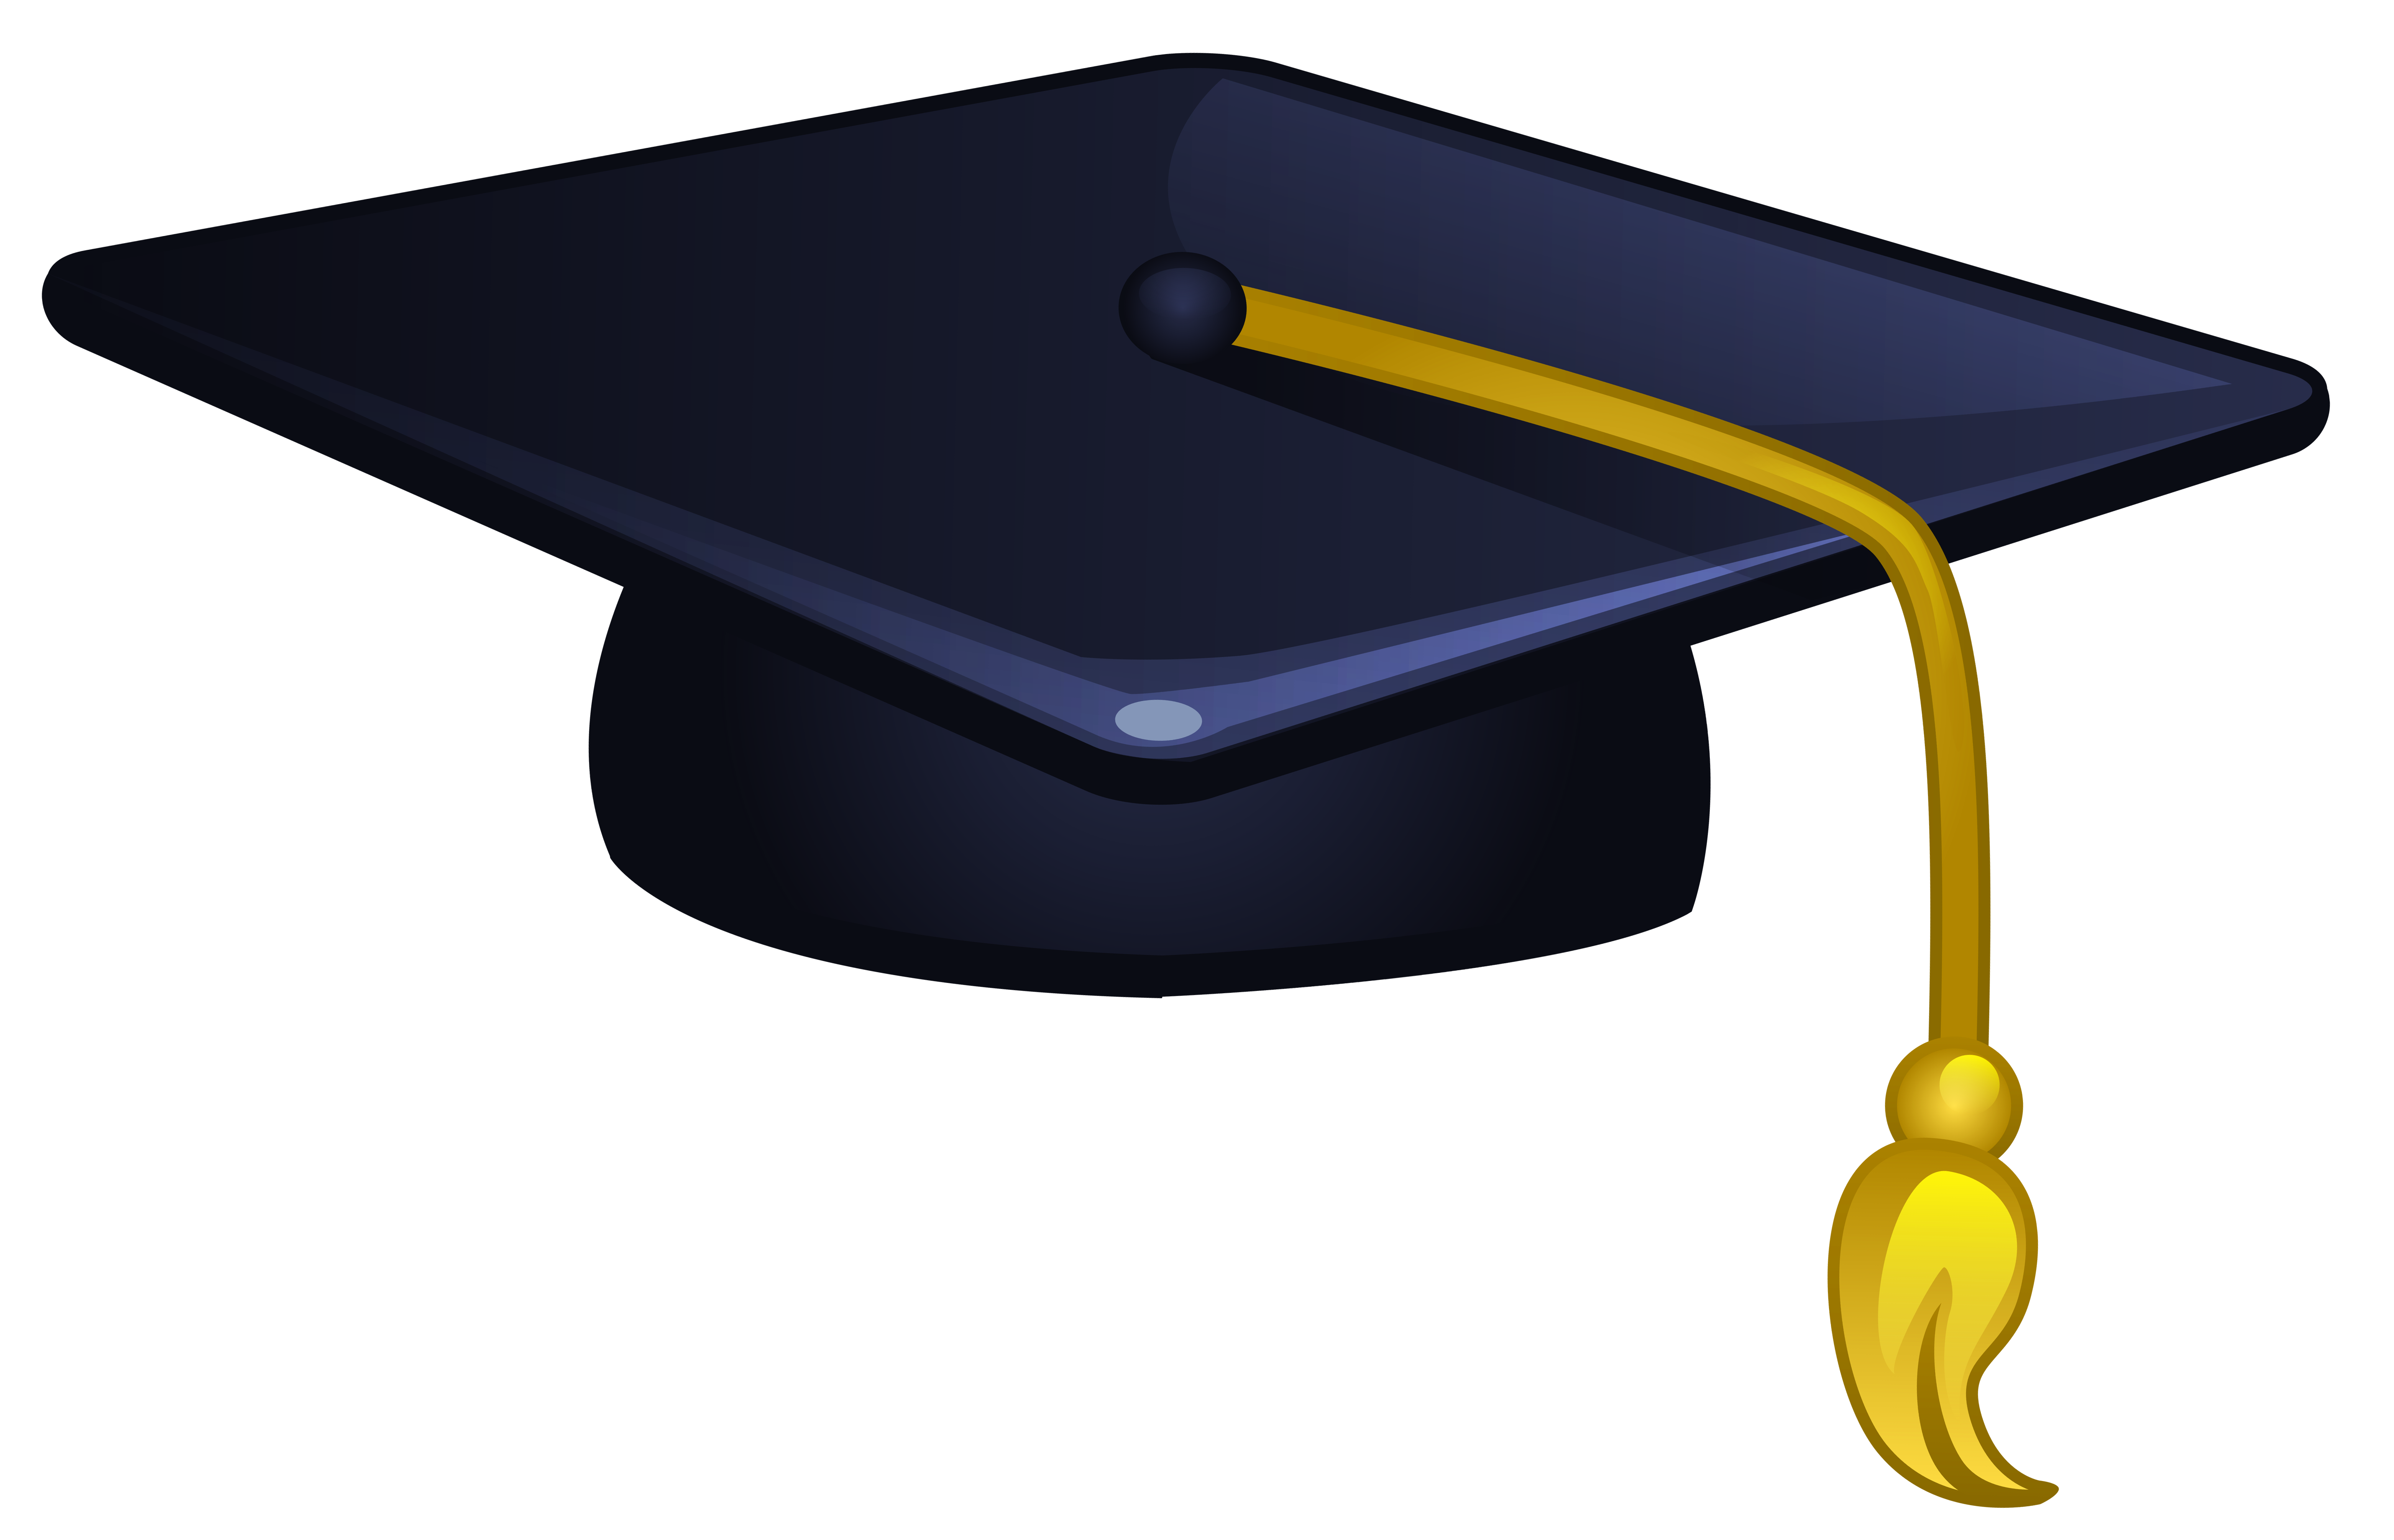 Graduation cap vector png. Picture gallery yopriceville high